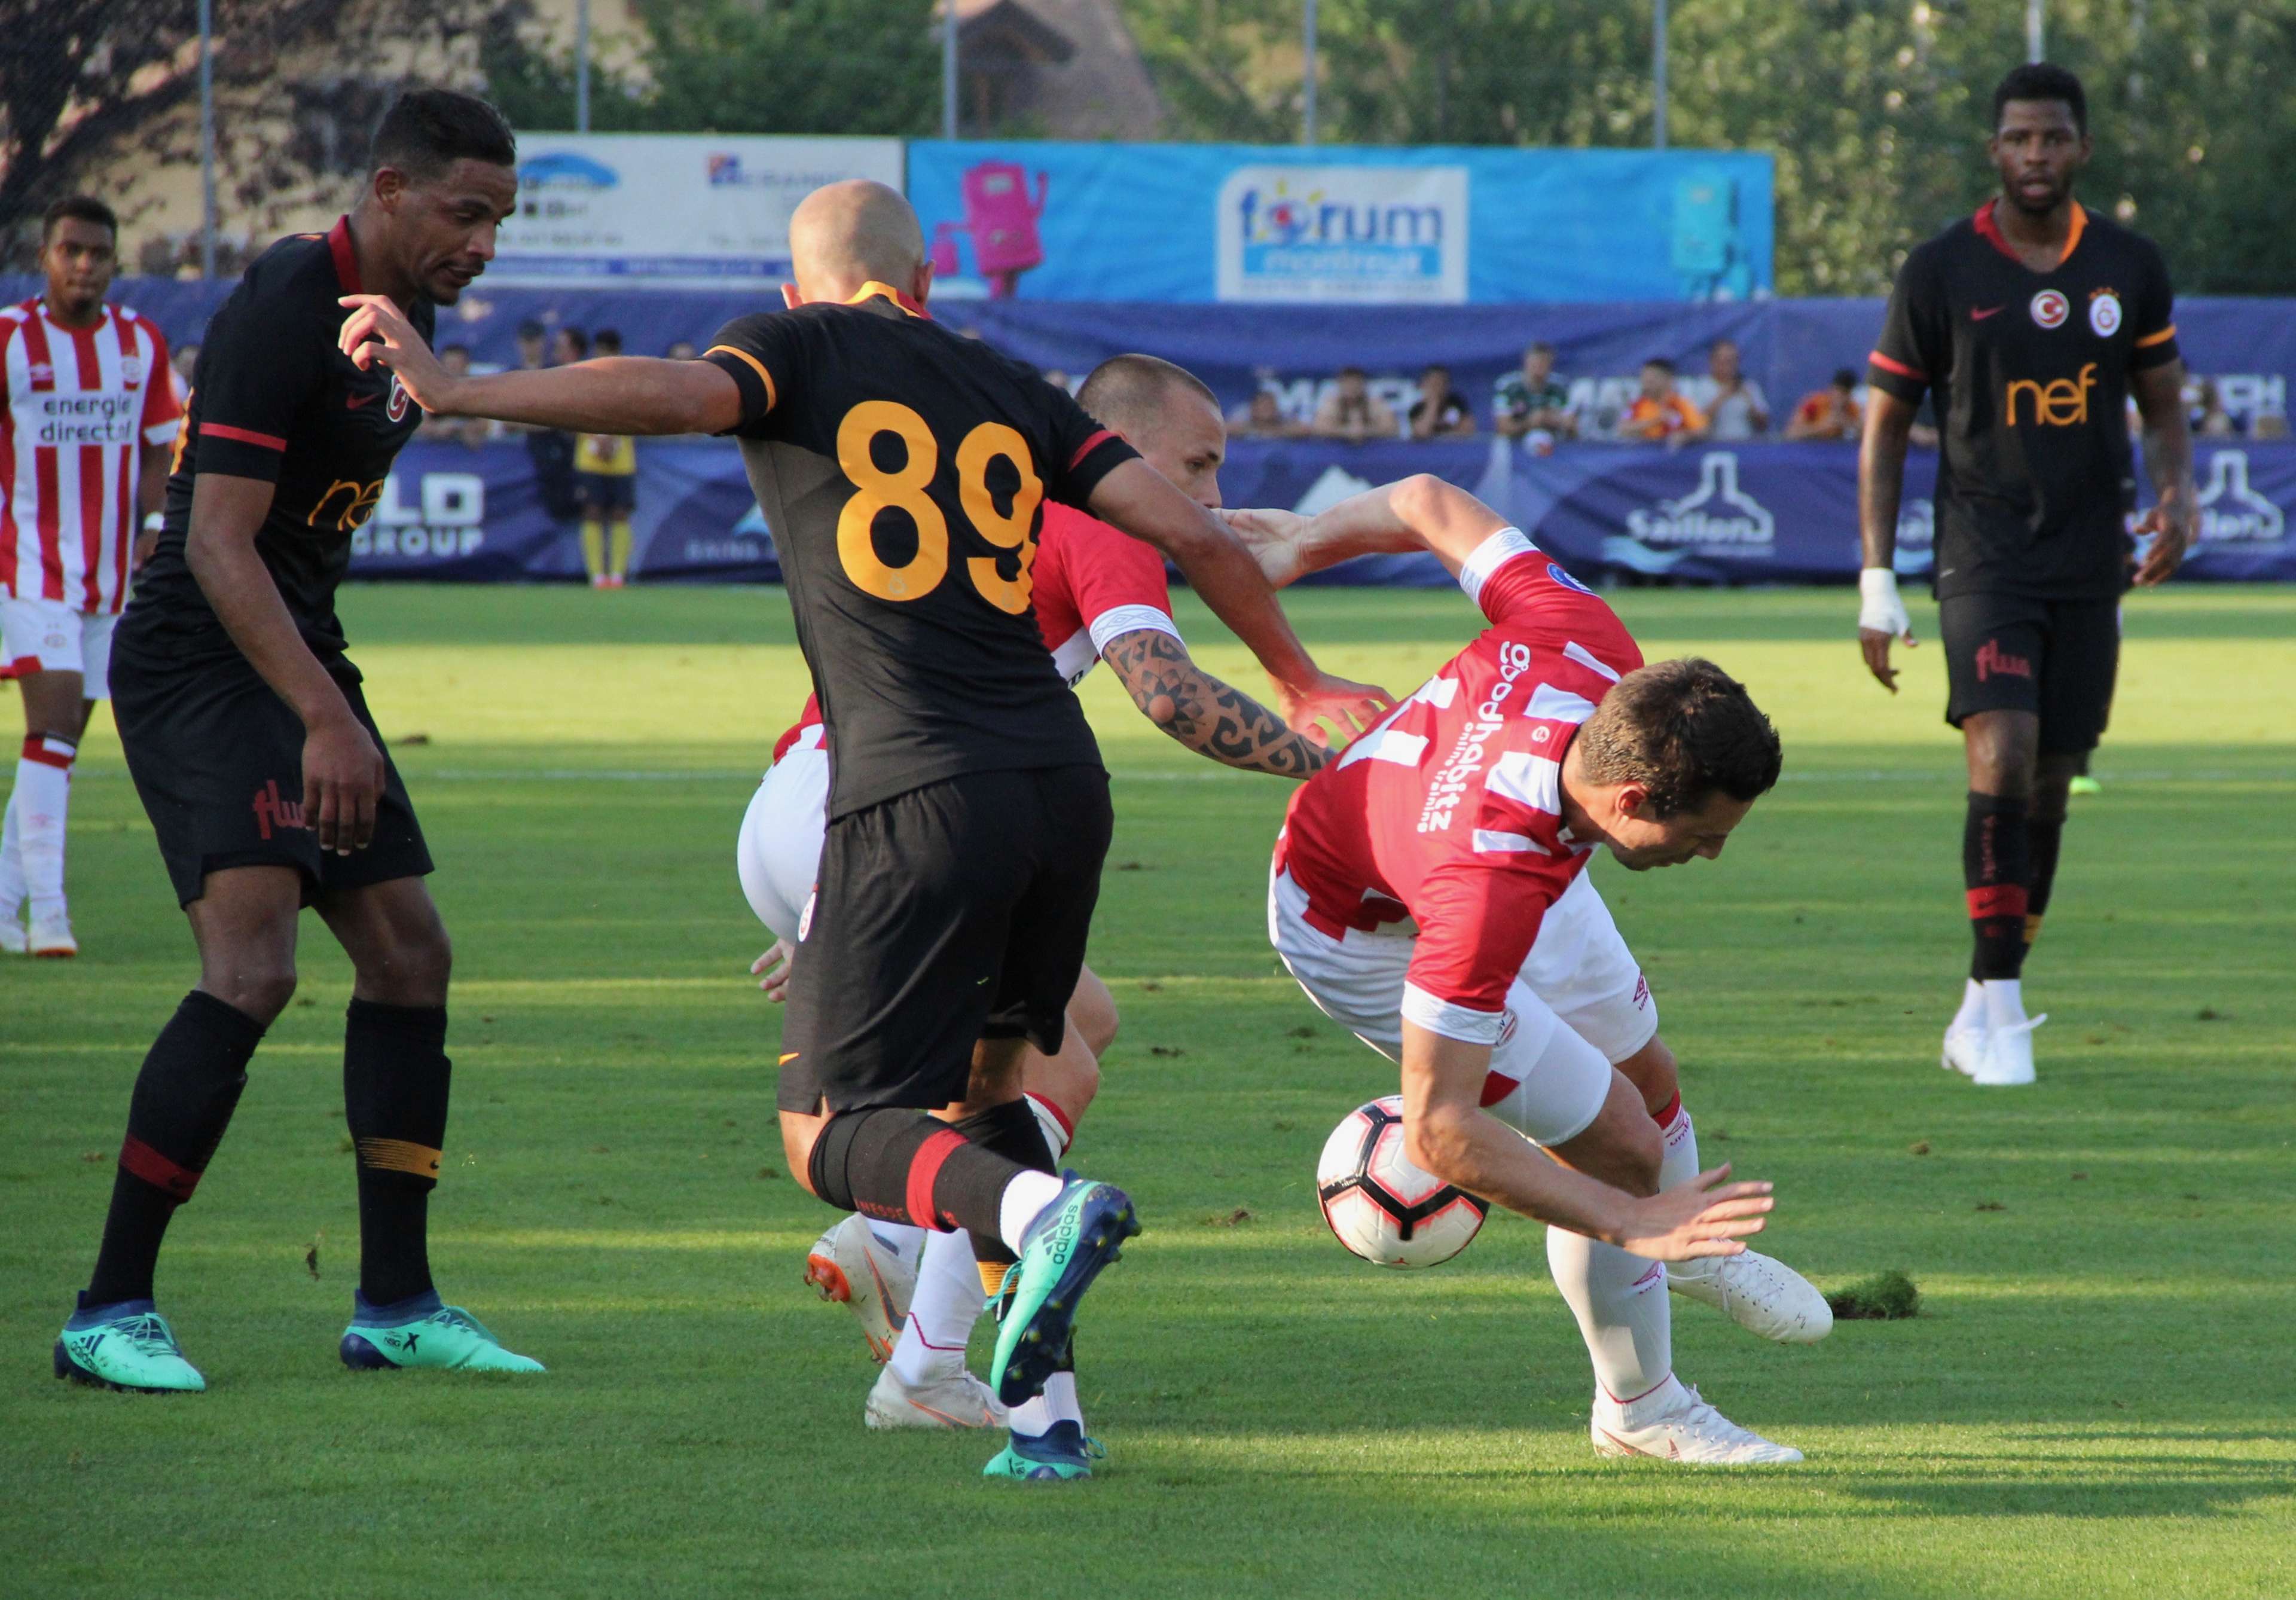 Galatasaray PSV Eindhoven Friendly Game 07/18/18